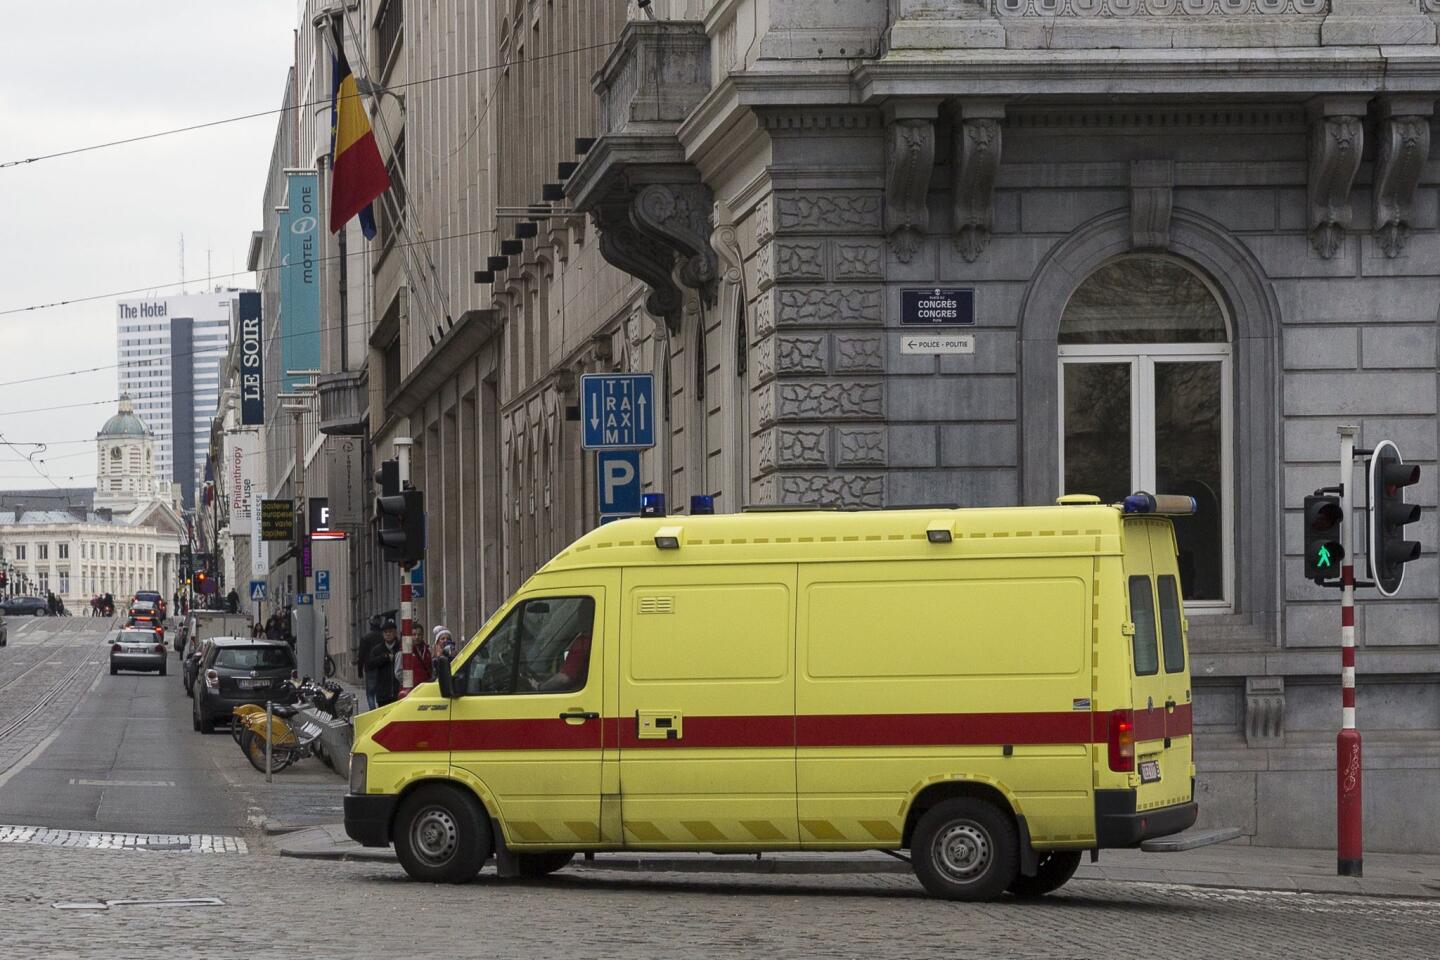 An ambulance believed to be transporting top Paris attacks suspect Salah Abdeslam leaves the building of the Federal Police in Brussels on March 19, 2016.